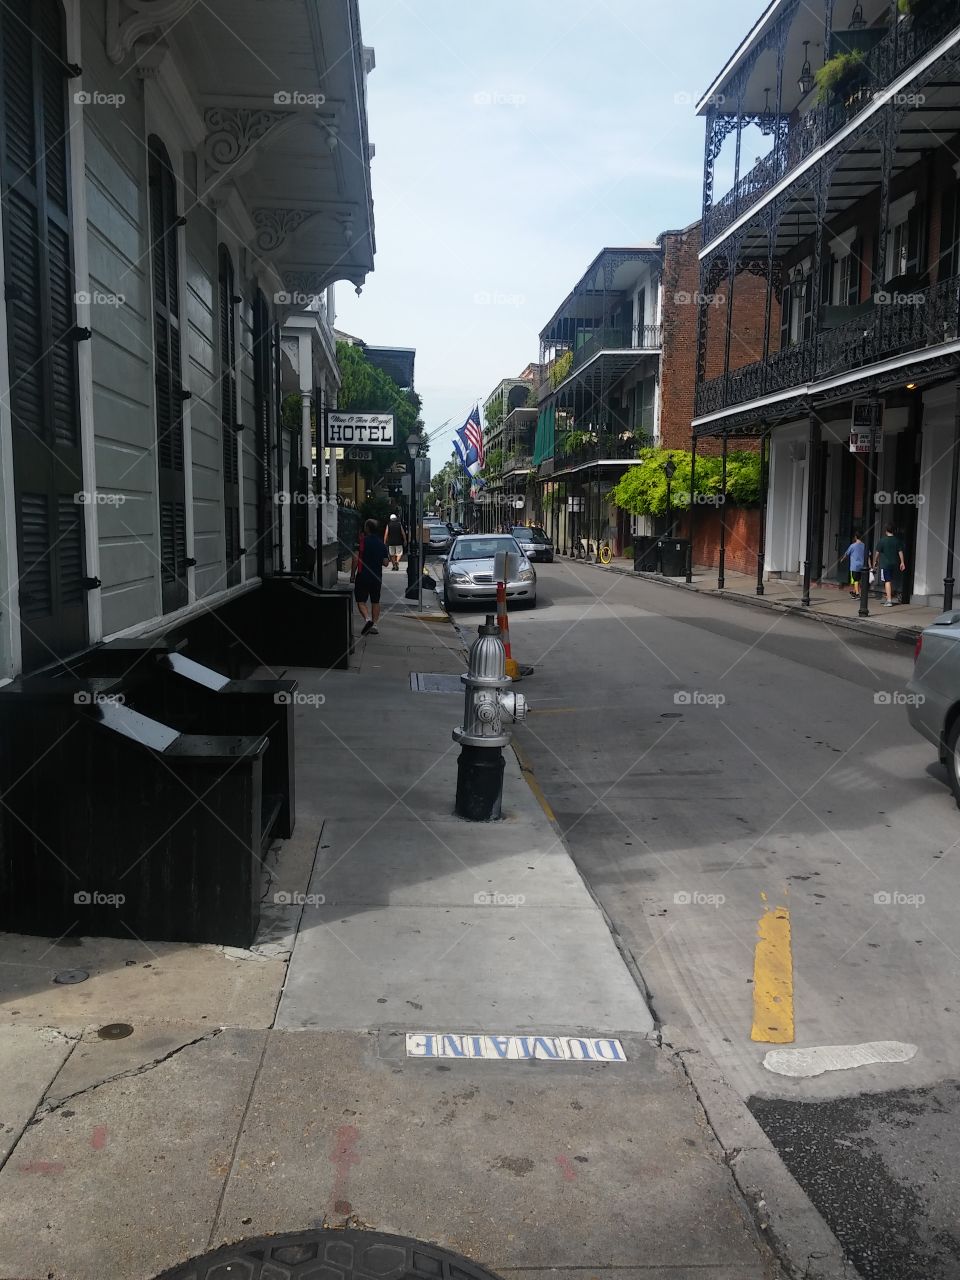 #New Orleans French Quarters